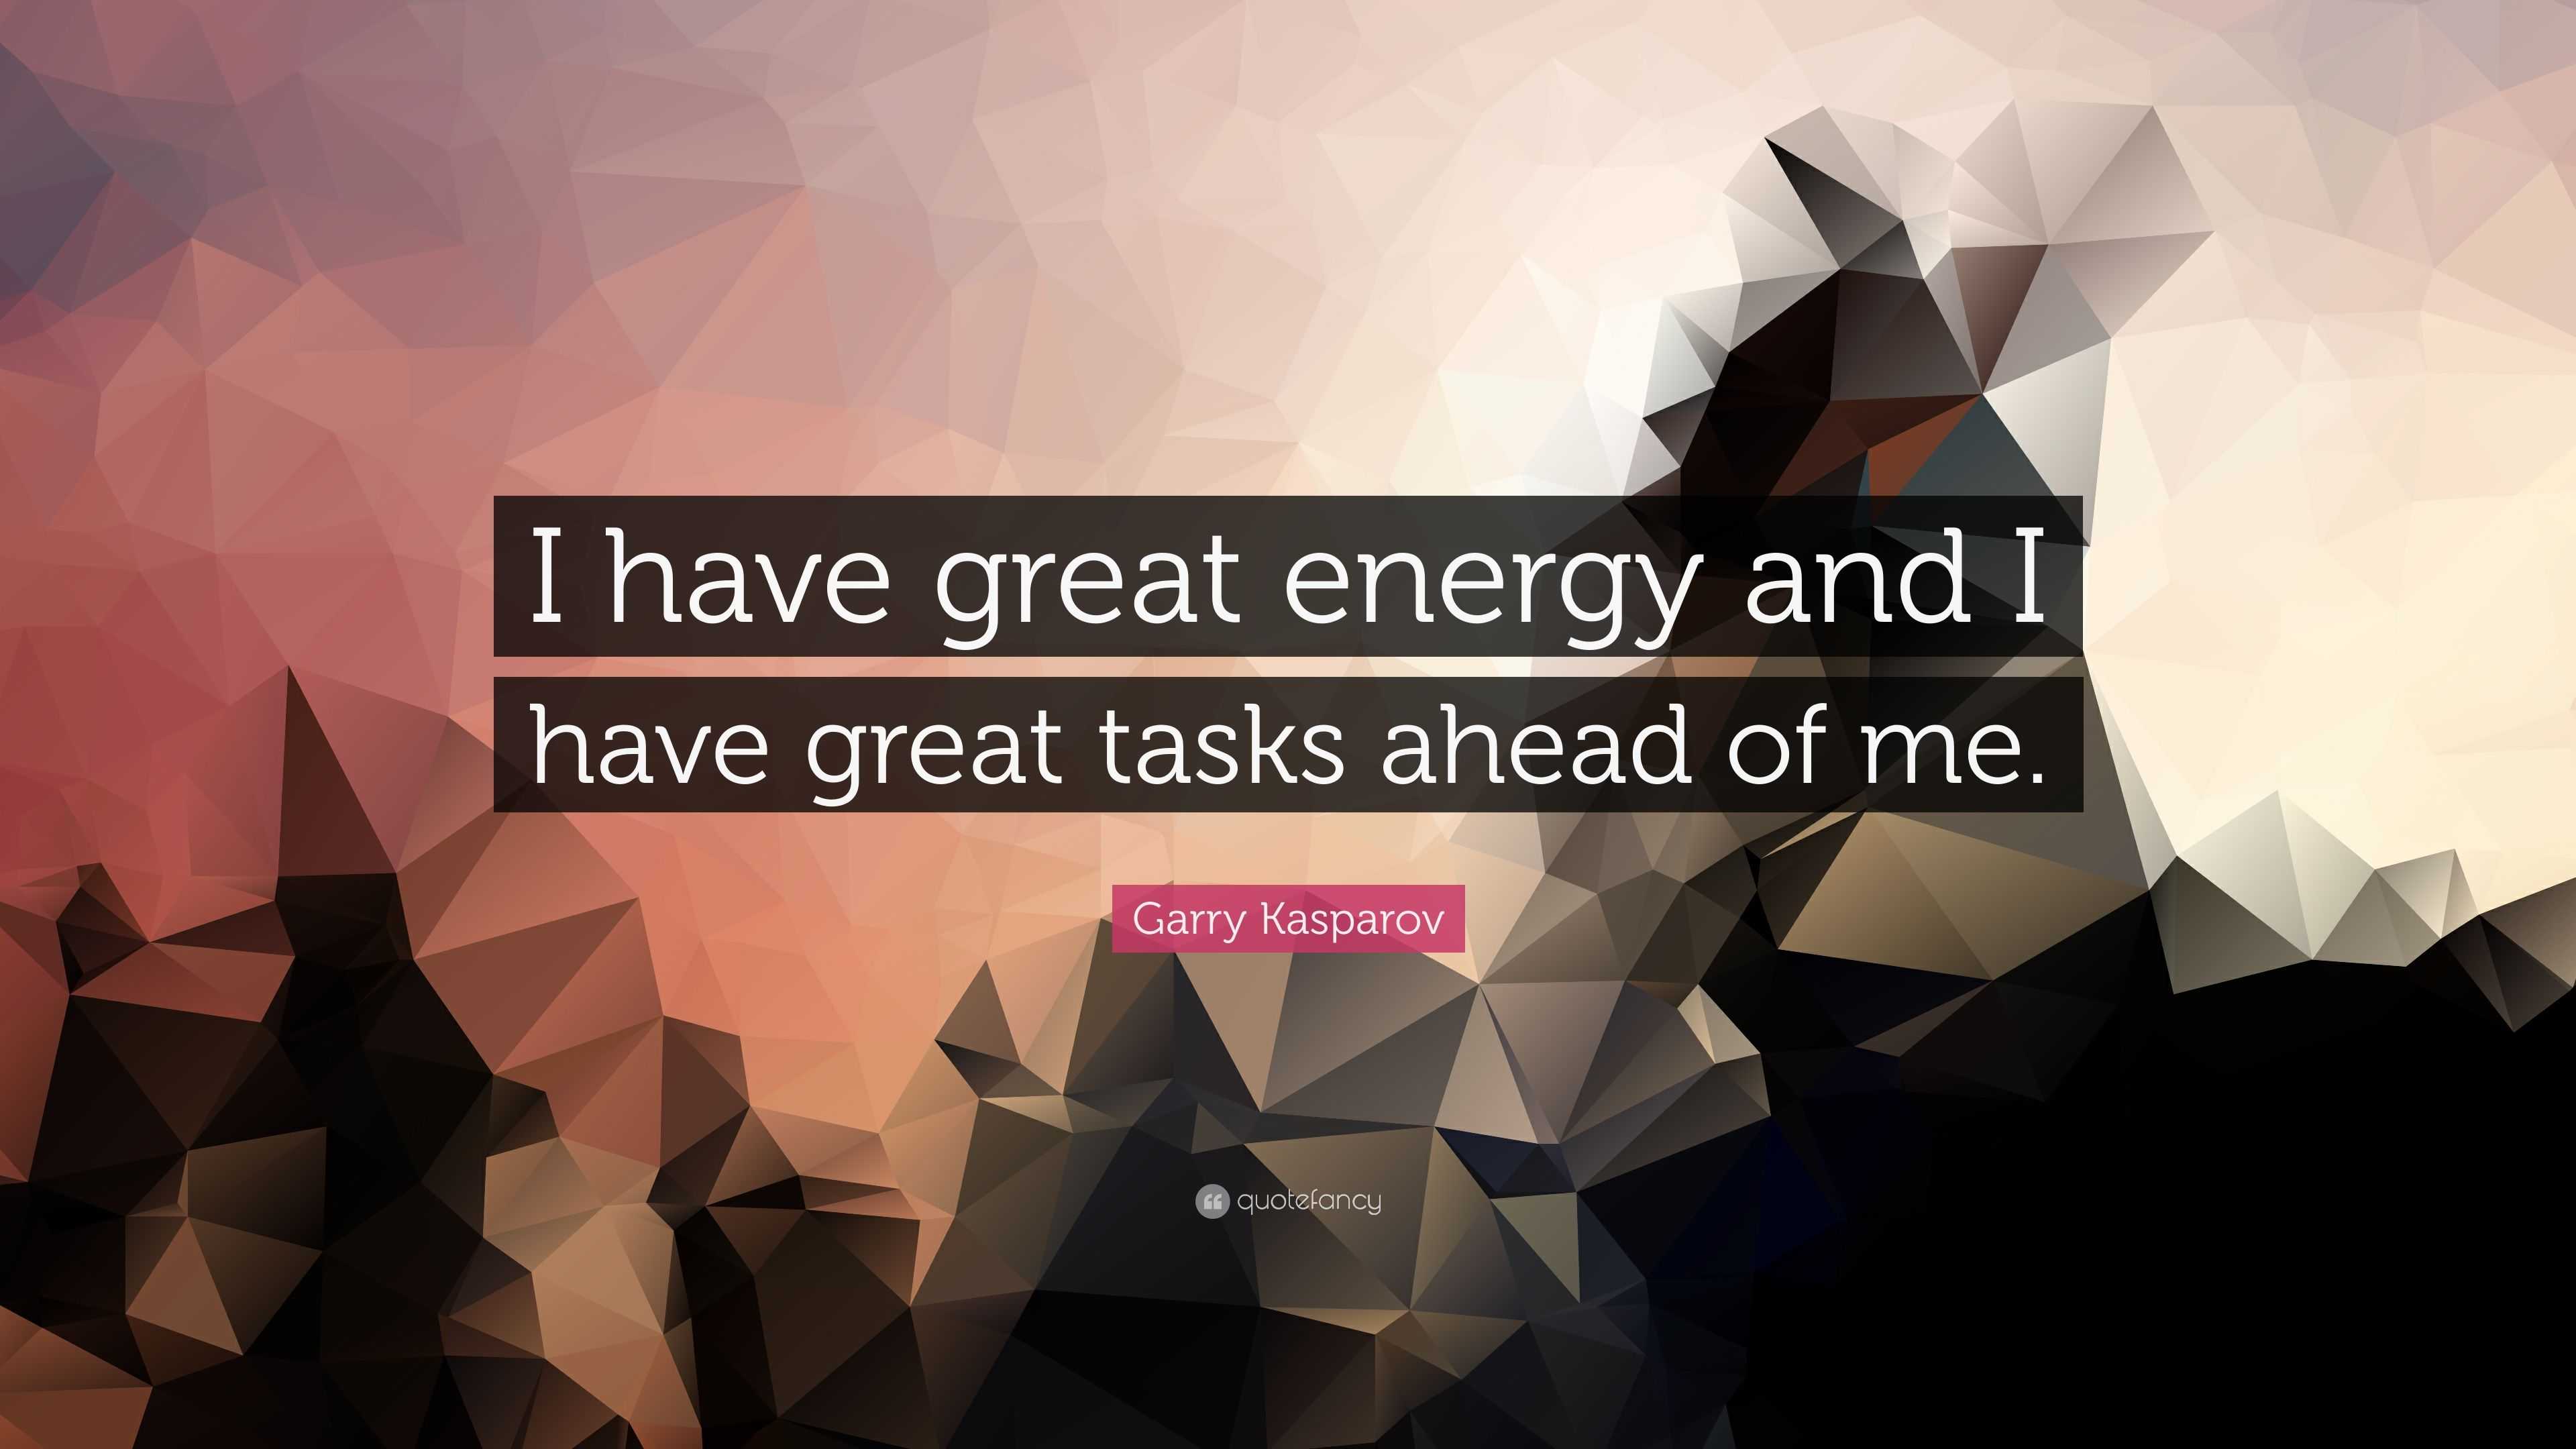 3833225-Garry-Kasparov-Quote-I-have-great-energy-and-I-have-great-tasks.jpg